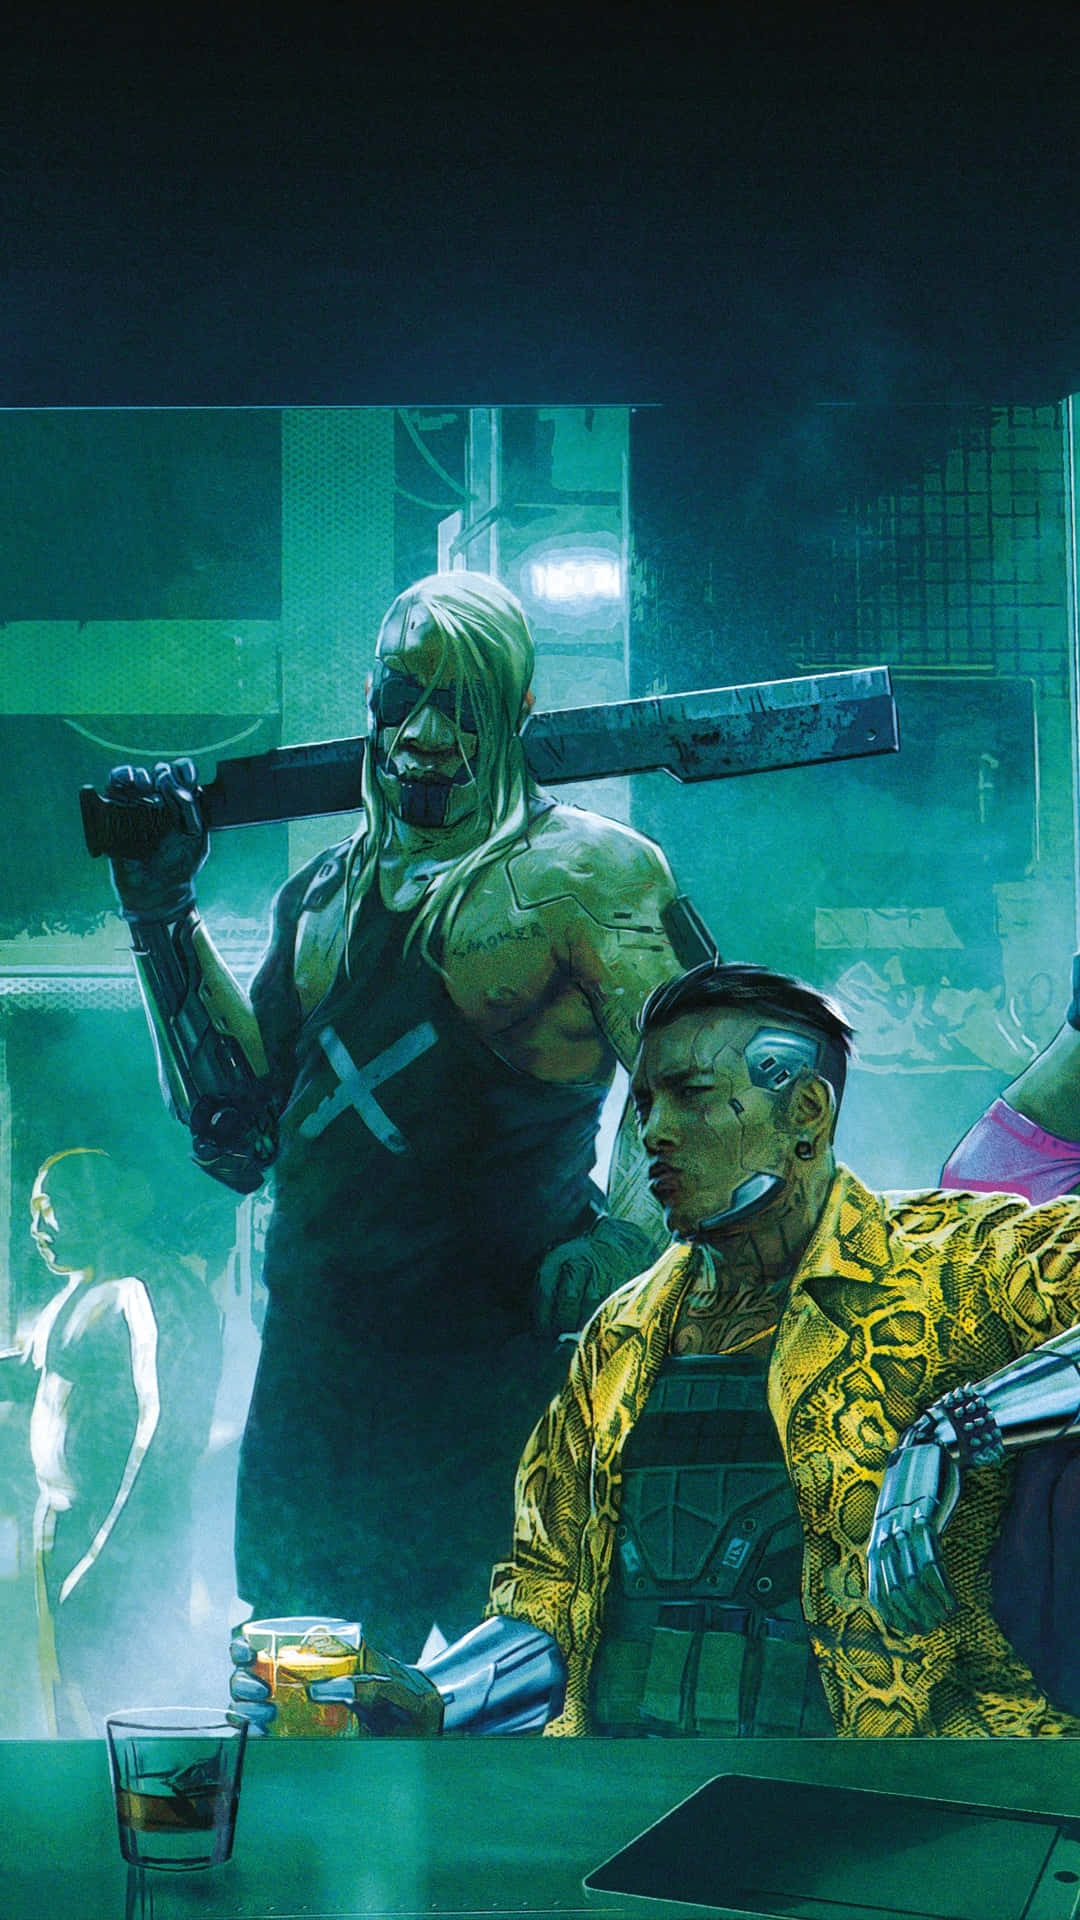 Night City warriors in action: Experience the world of Cyberpunk 2077 Wallpaper